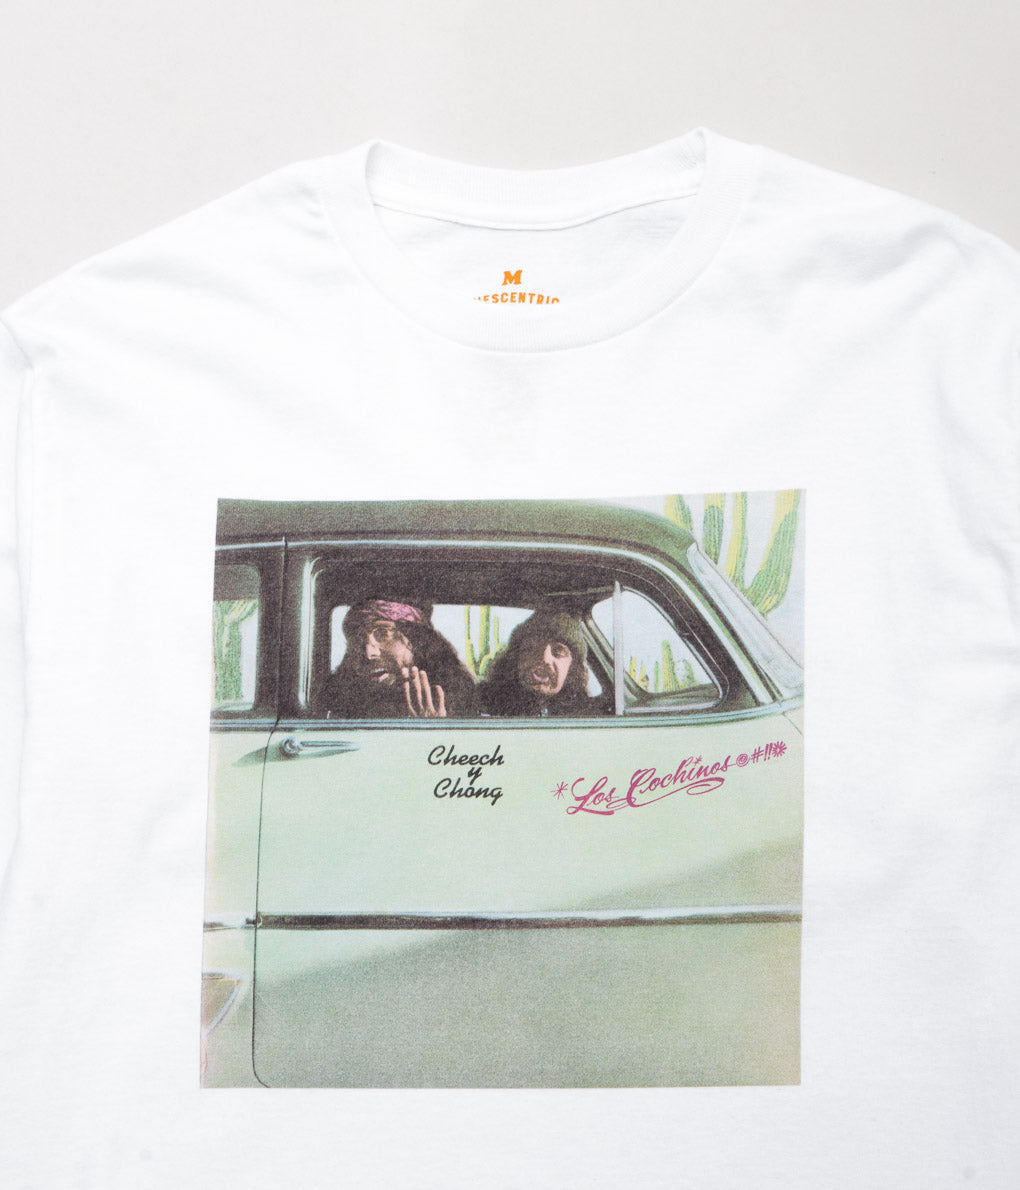 BLUESCENTRIC ''CHEECH AND CHONG LOS COCHINOS L/S
'' (WHITE)